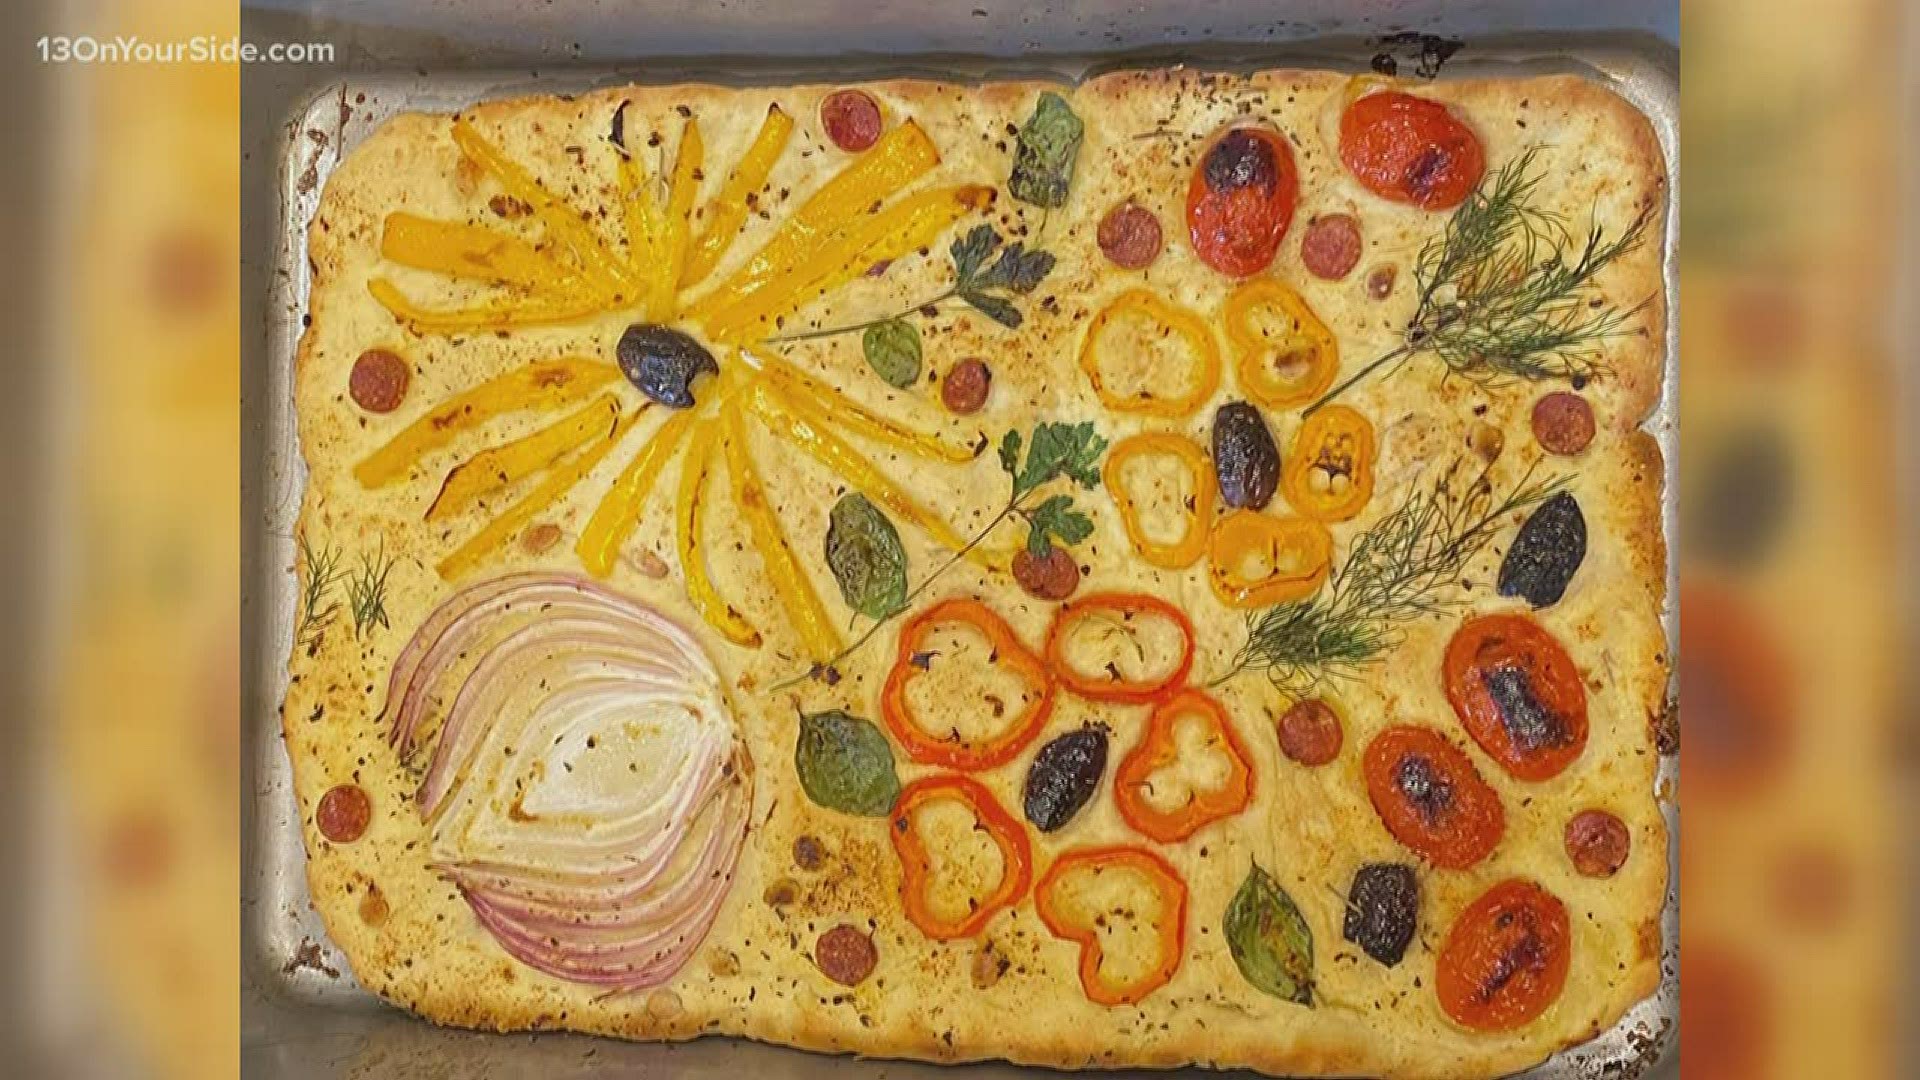 Get creative with your veggies and turn them into a work of art that's actually tasty!